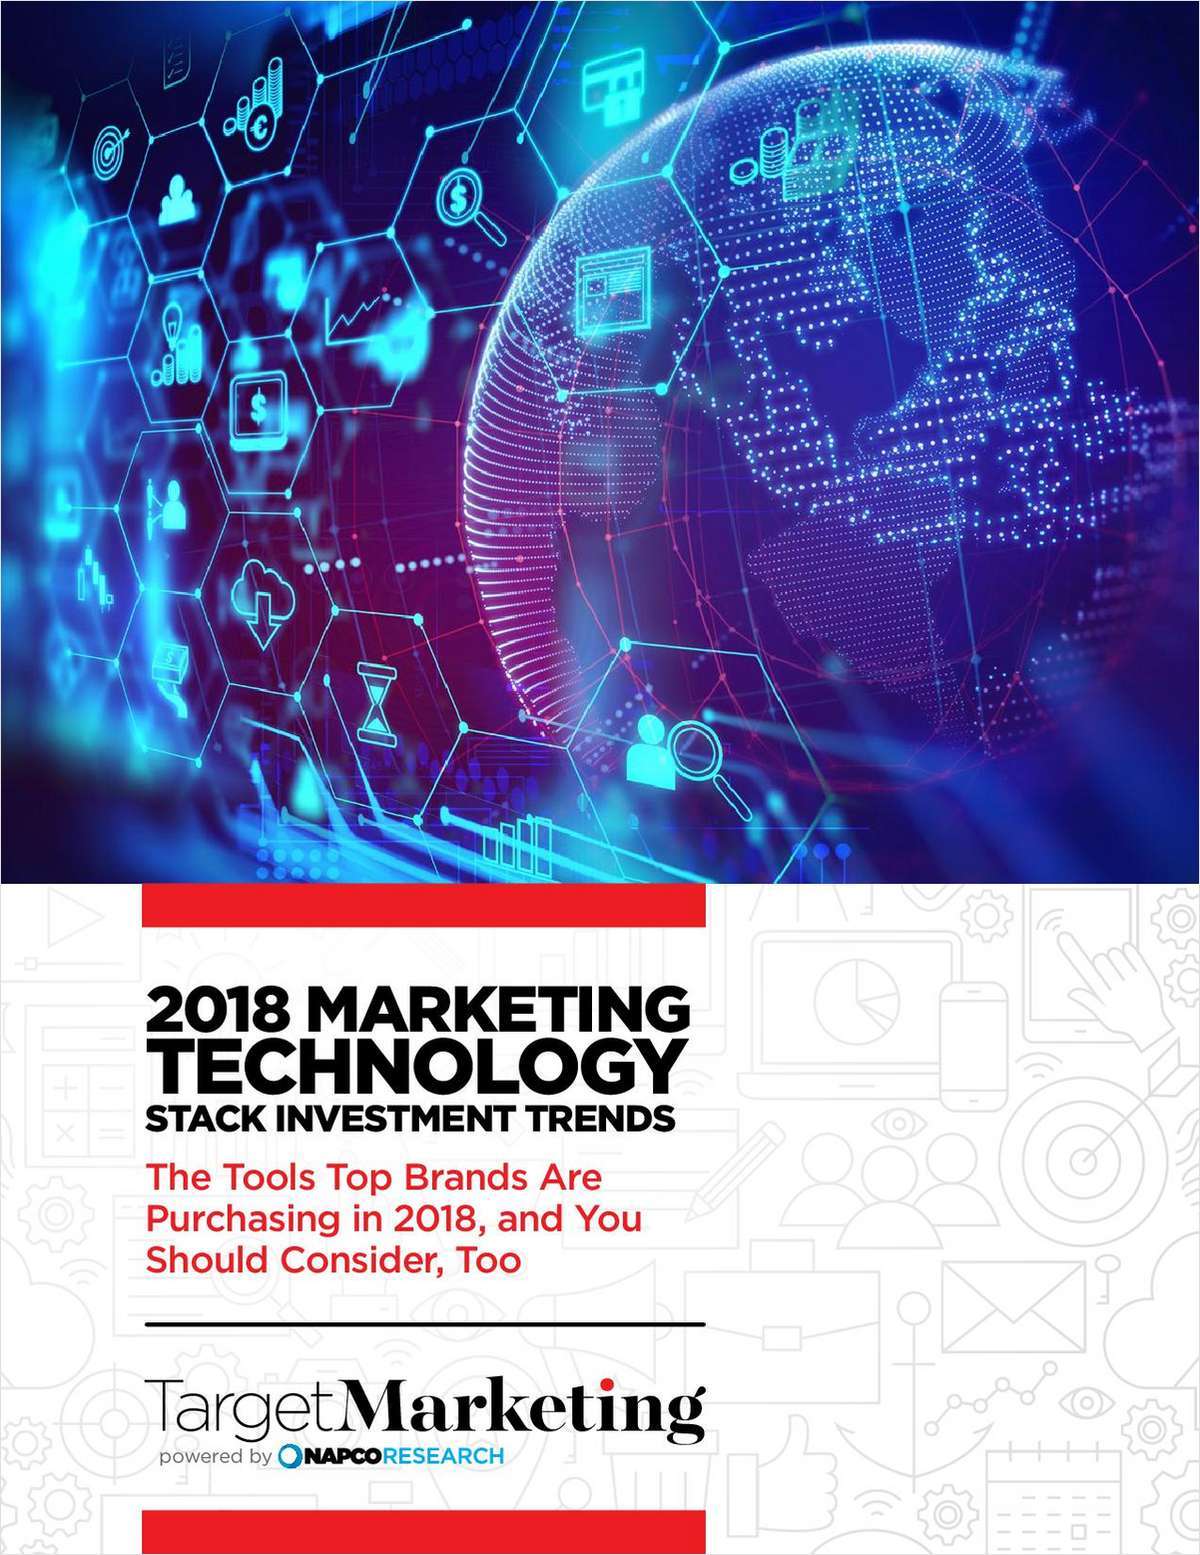 2018 Marketing Technology Stack Investment Trends